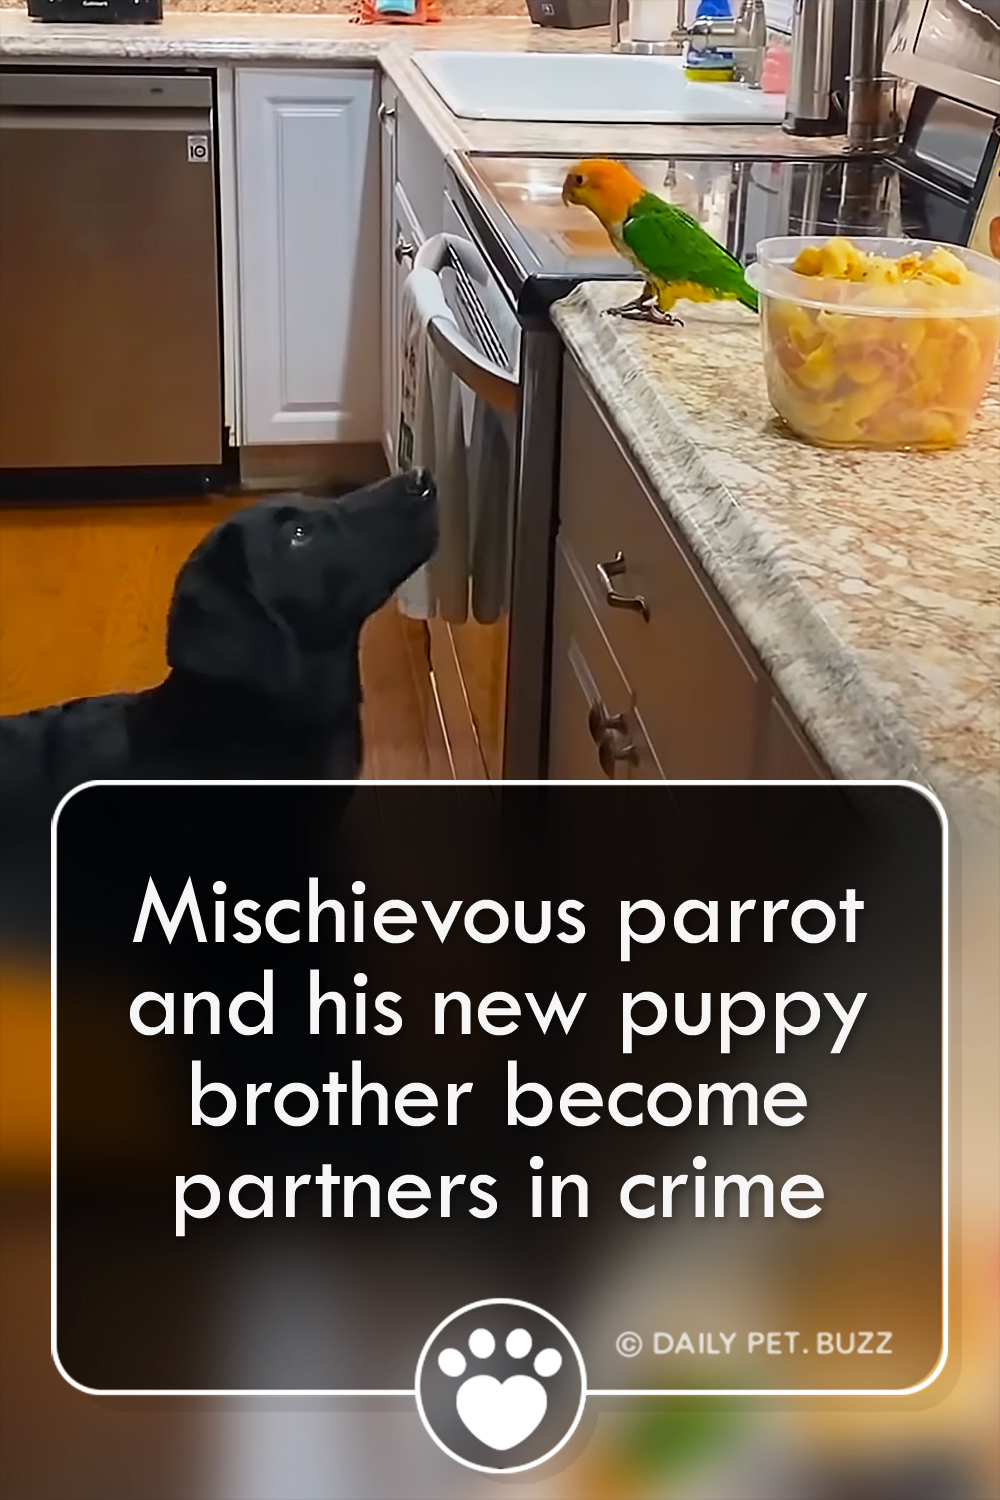 Mischievous parrot and his new puppy brother become partners in crime